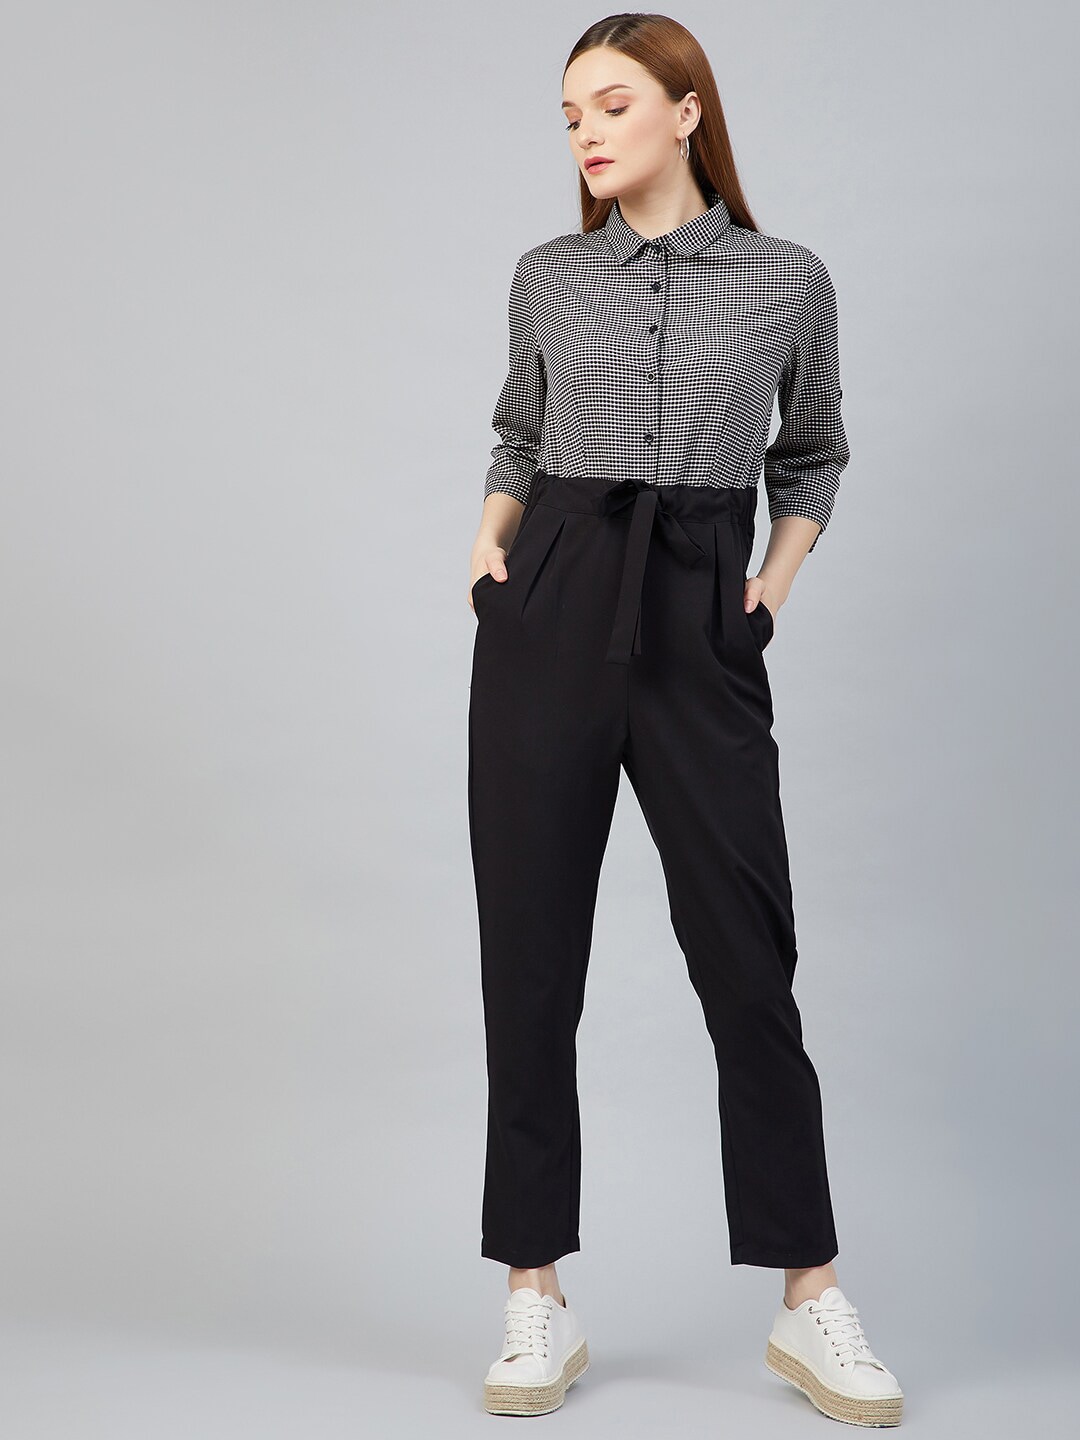 RARE Black & White Checked Basic Jumpsuit Price in India